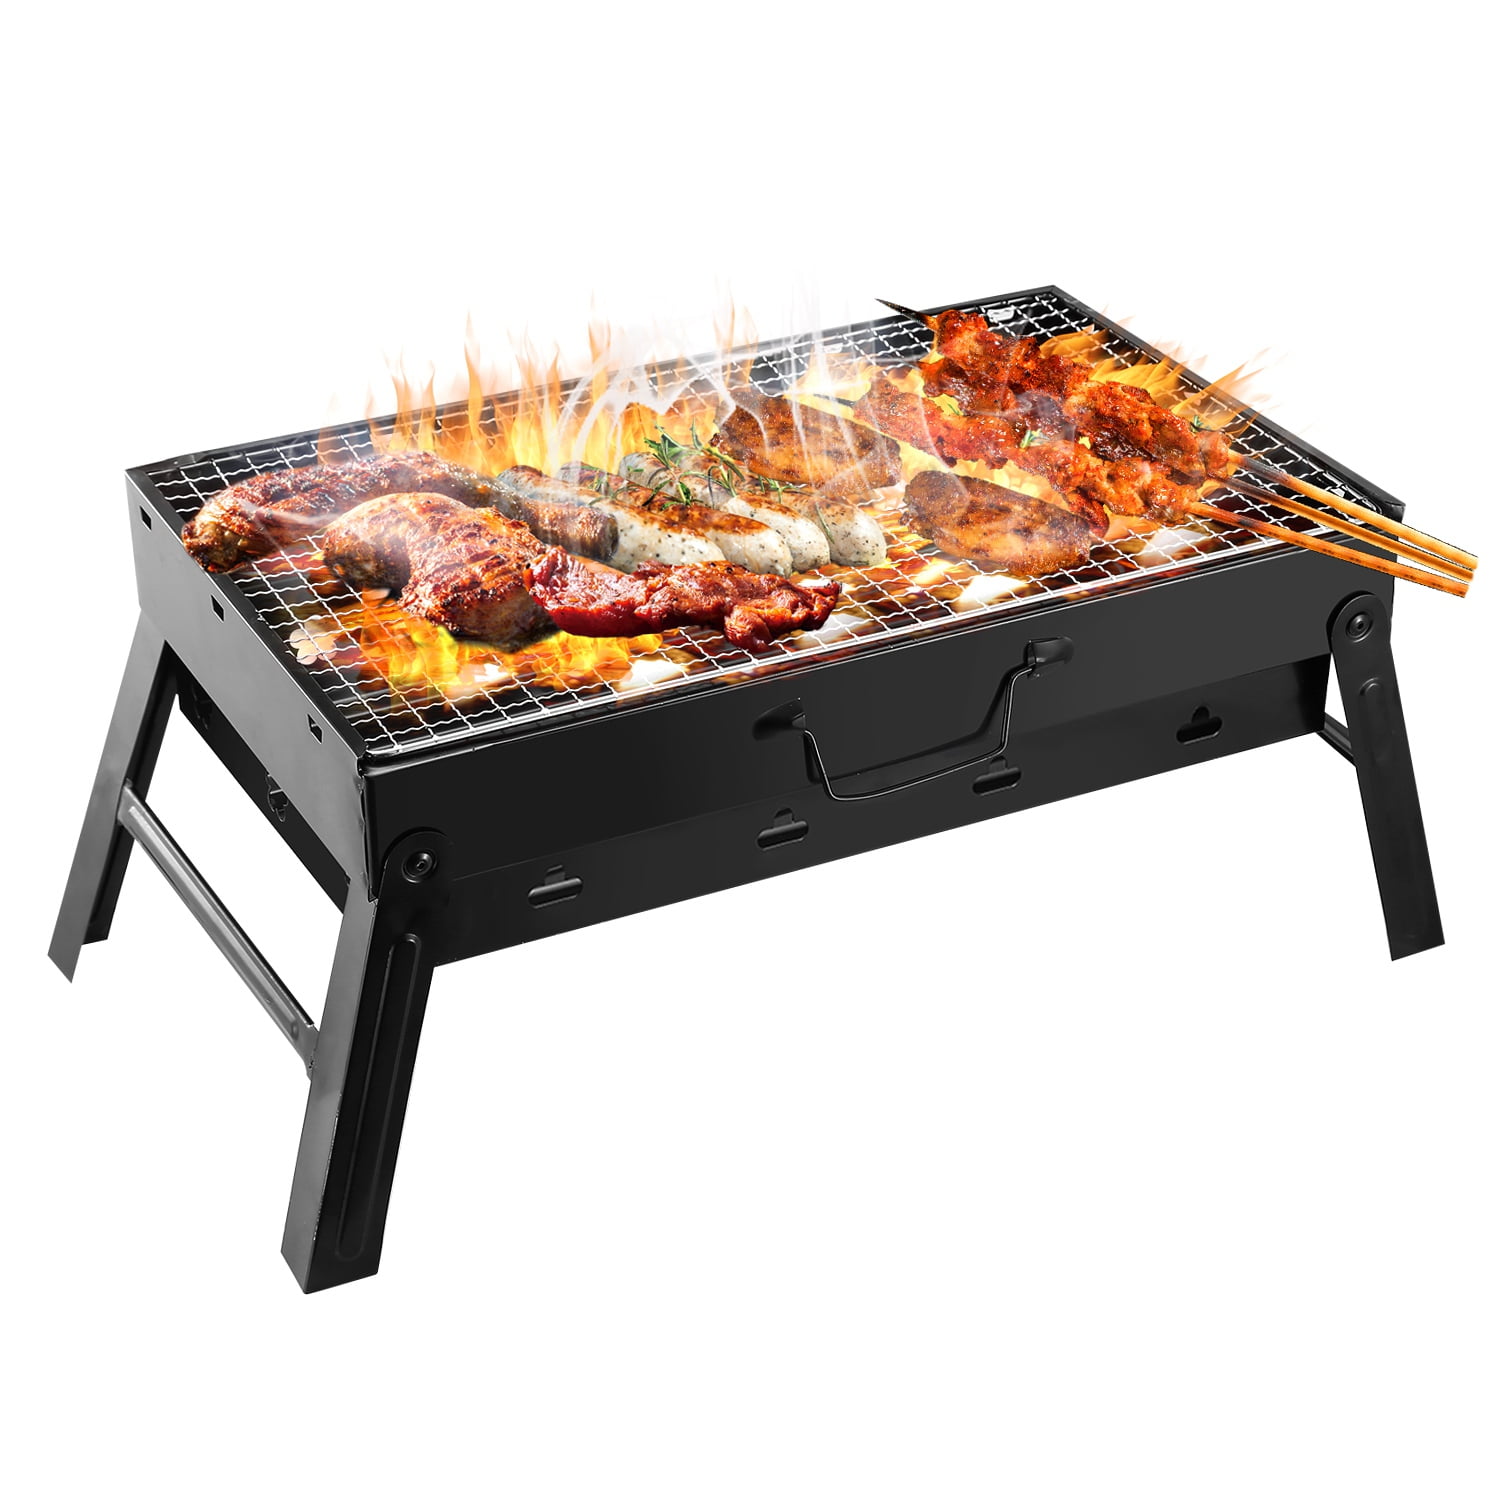 Small Portable BBQ by Fresh Grills Folding Portable BBQ for Camping Foldable Barbecue Fire Pit Ideal for Backpacking and Camping 